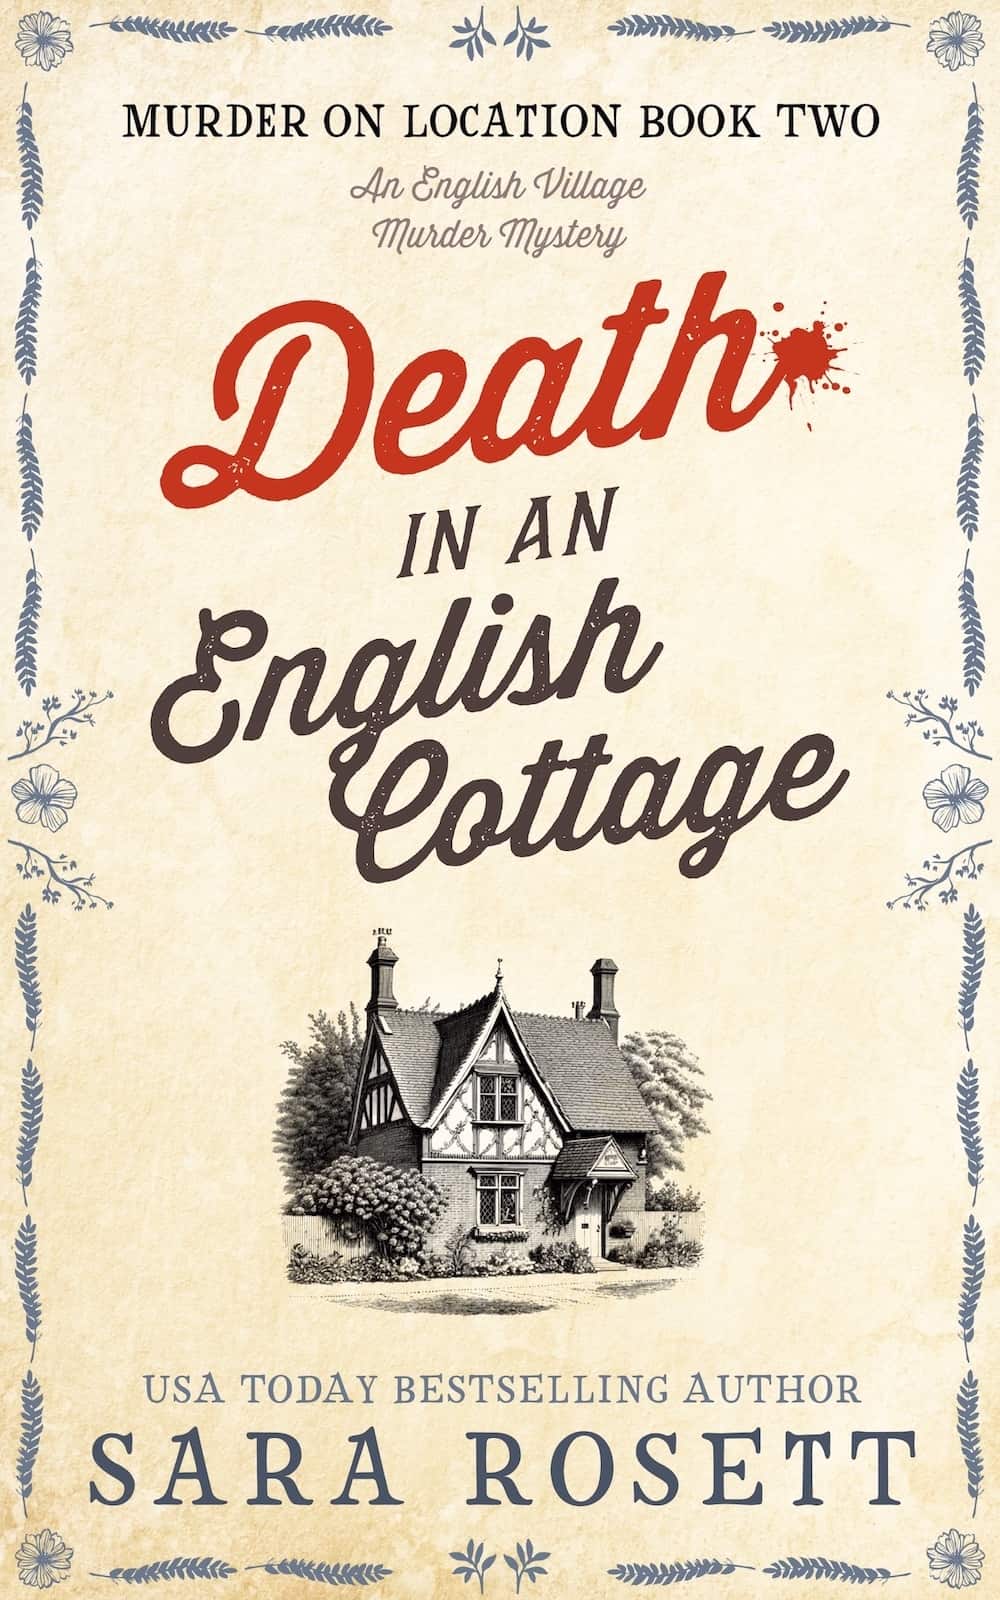 Death in an English Cottage by Sara Rosett